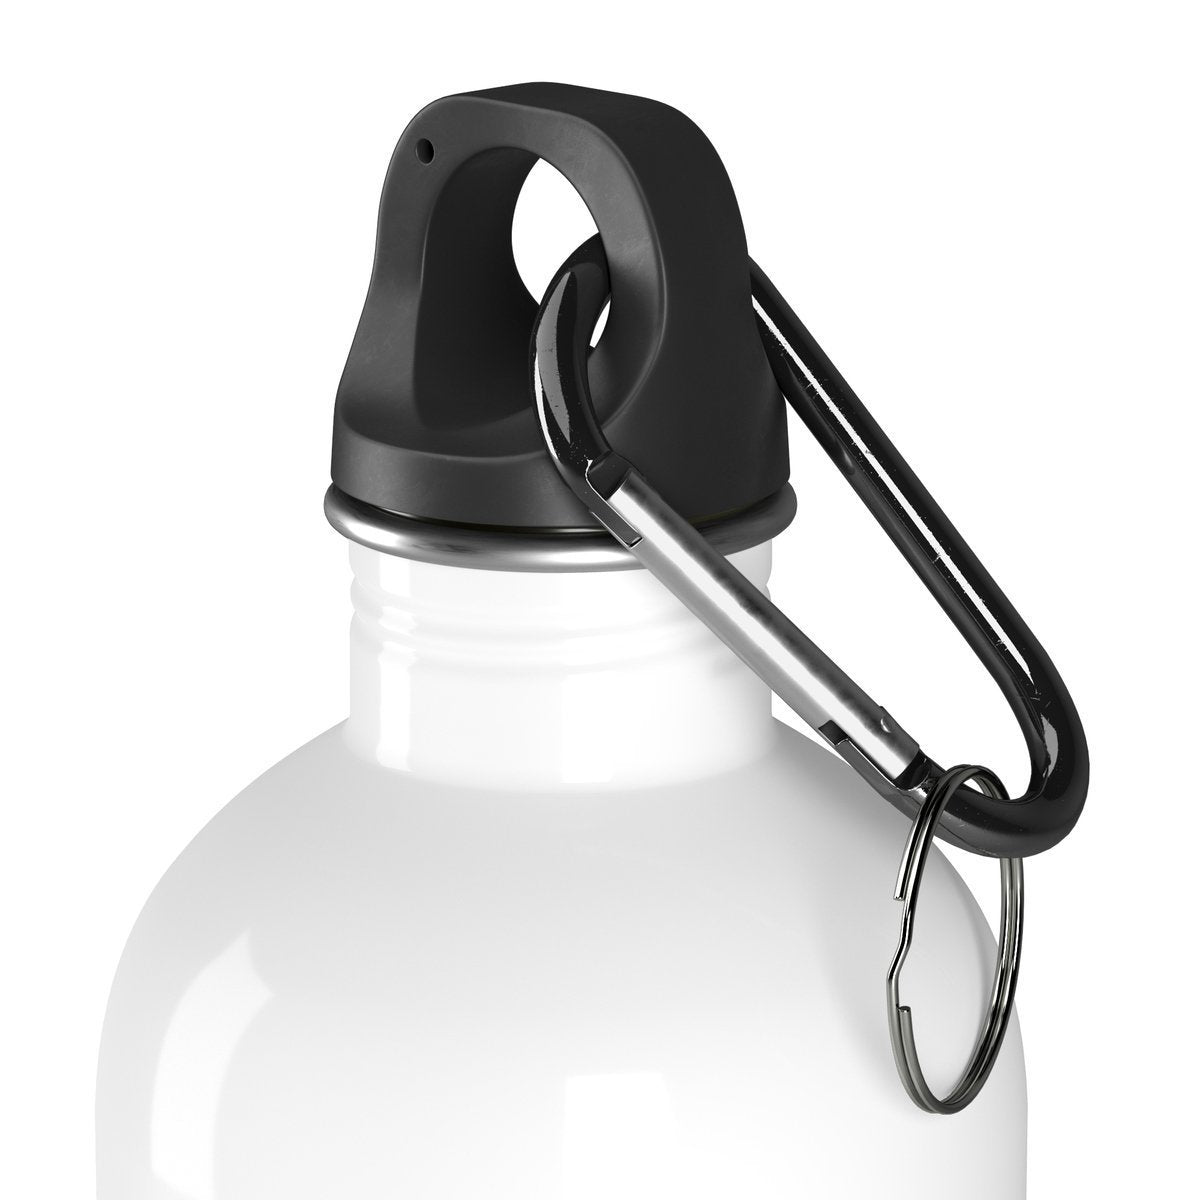 The plastic screw top is leak proof, making this cat water bottle perfect for throwing in your handbag or gym bag.